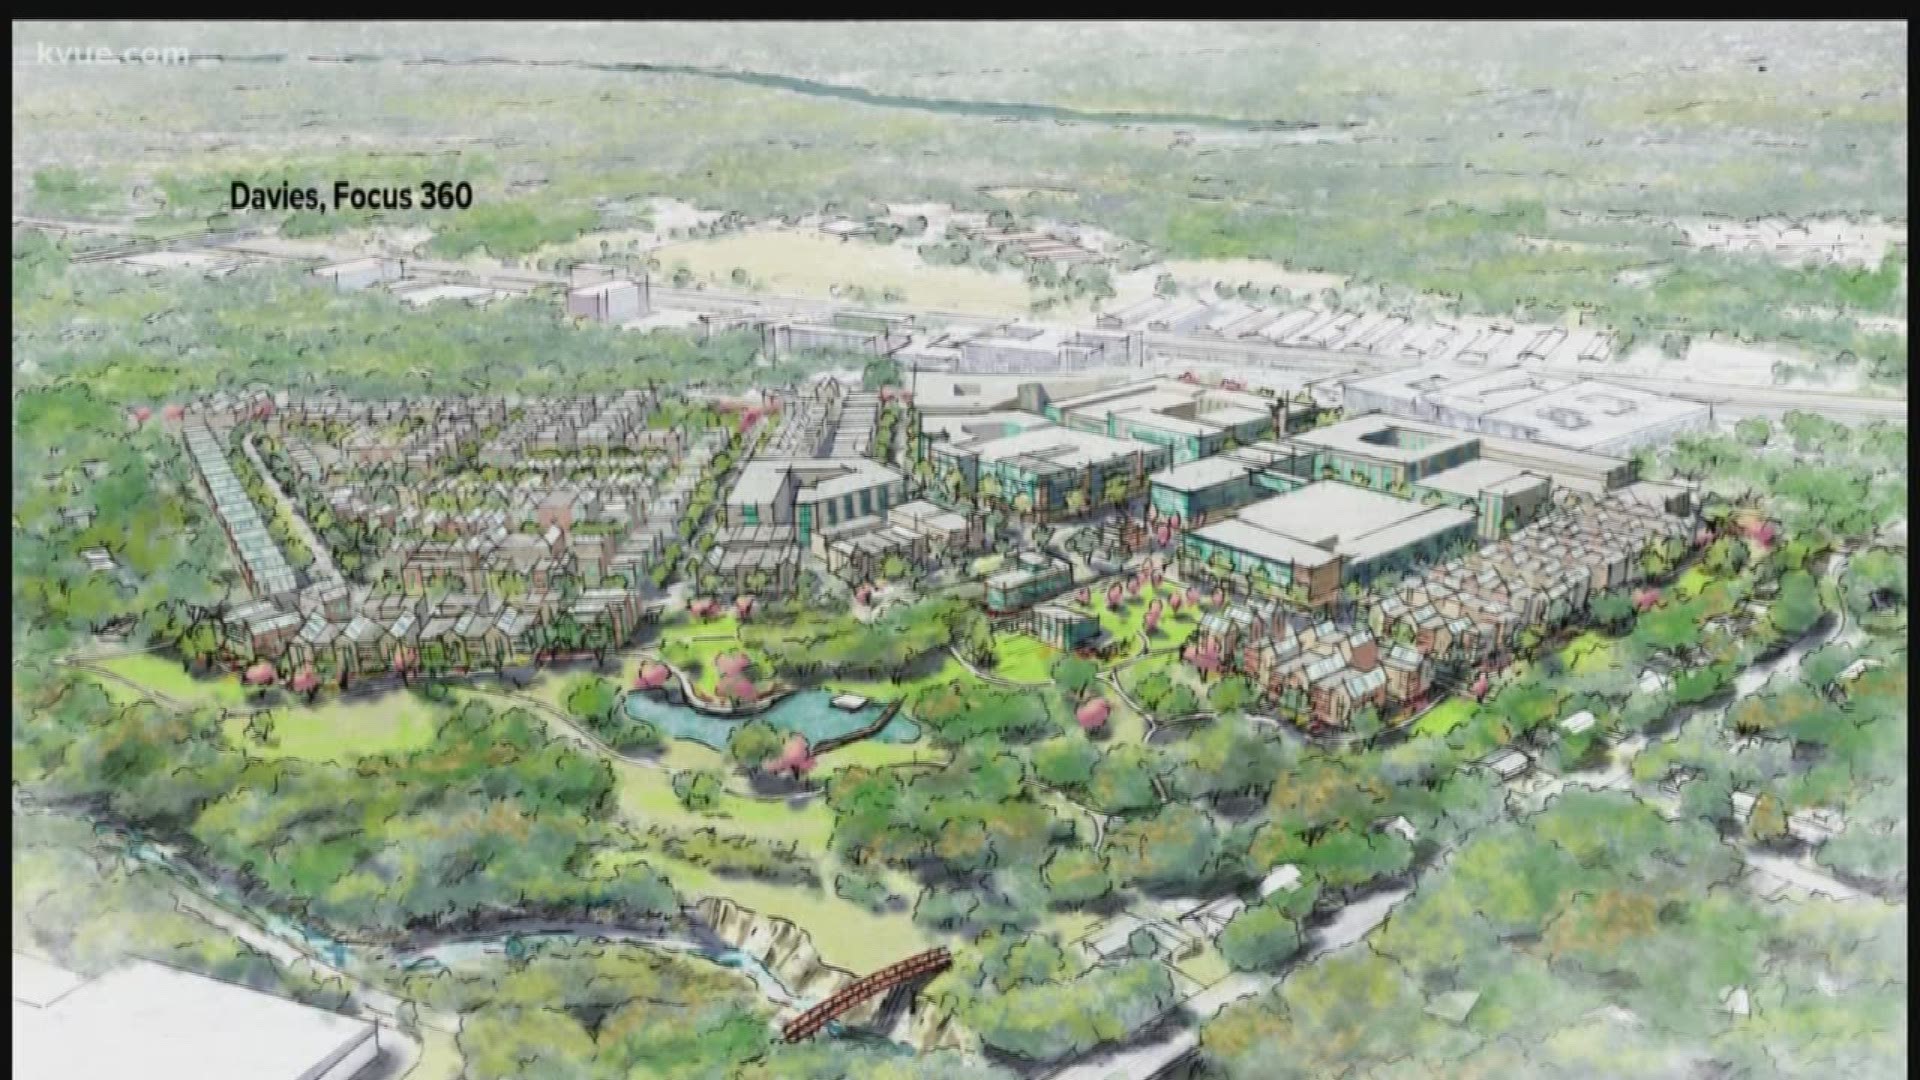 In 2014, an Austin-based developer bought 75 acres at 45th Street and Bull Creek from the State. The plan? Bring more homes, retail and business to Central Austin.